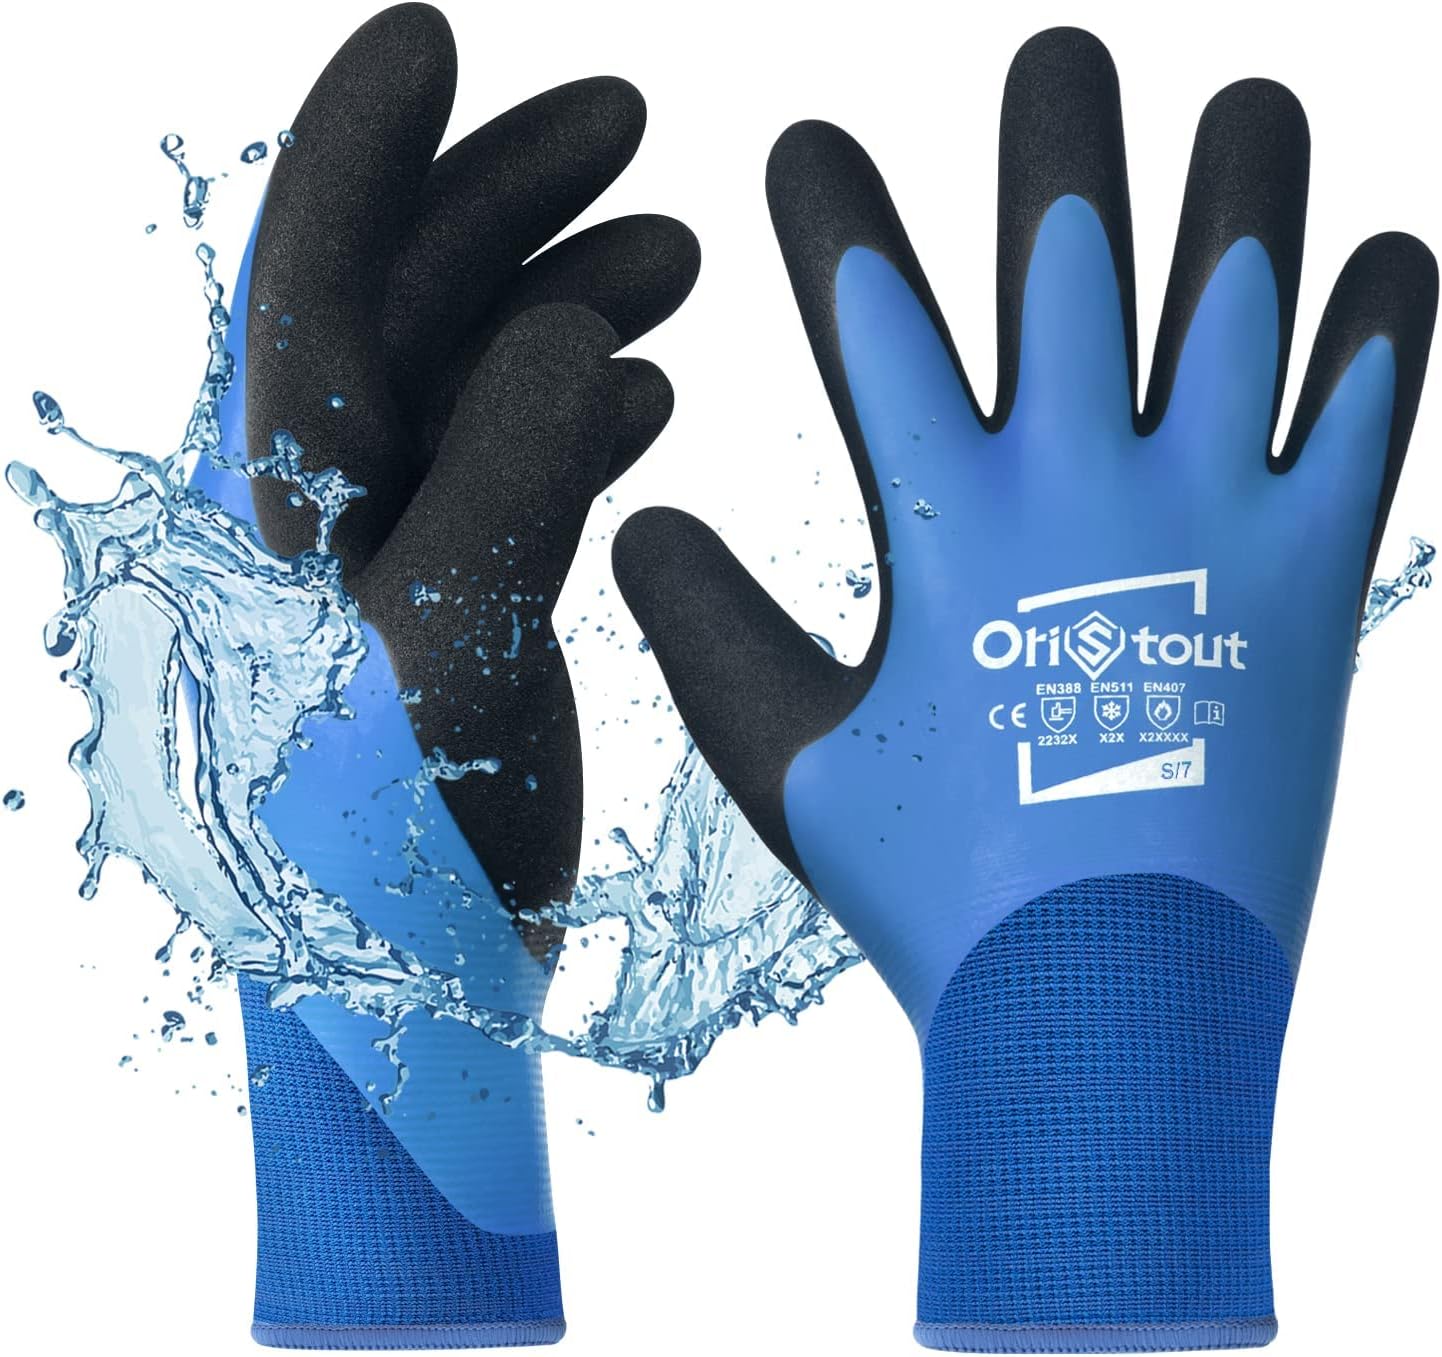 OriStout Waterproof Winter Work Gloves for Men and [...]